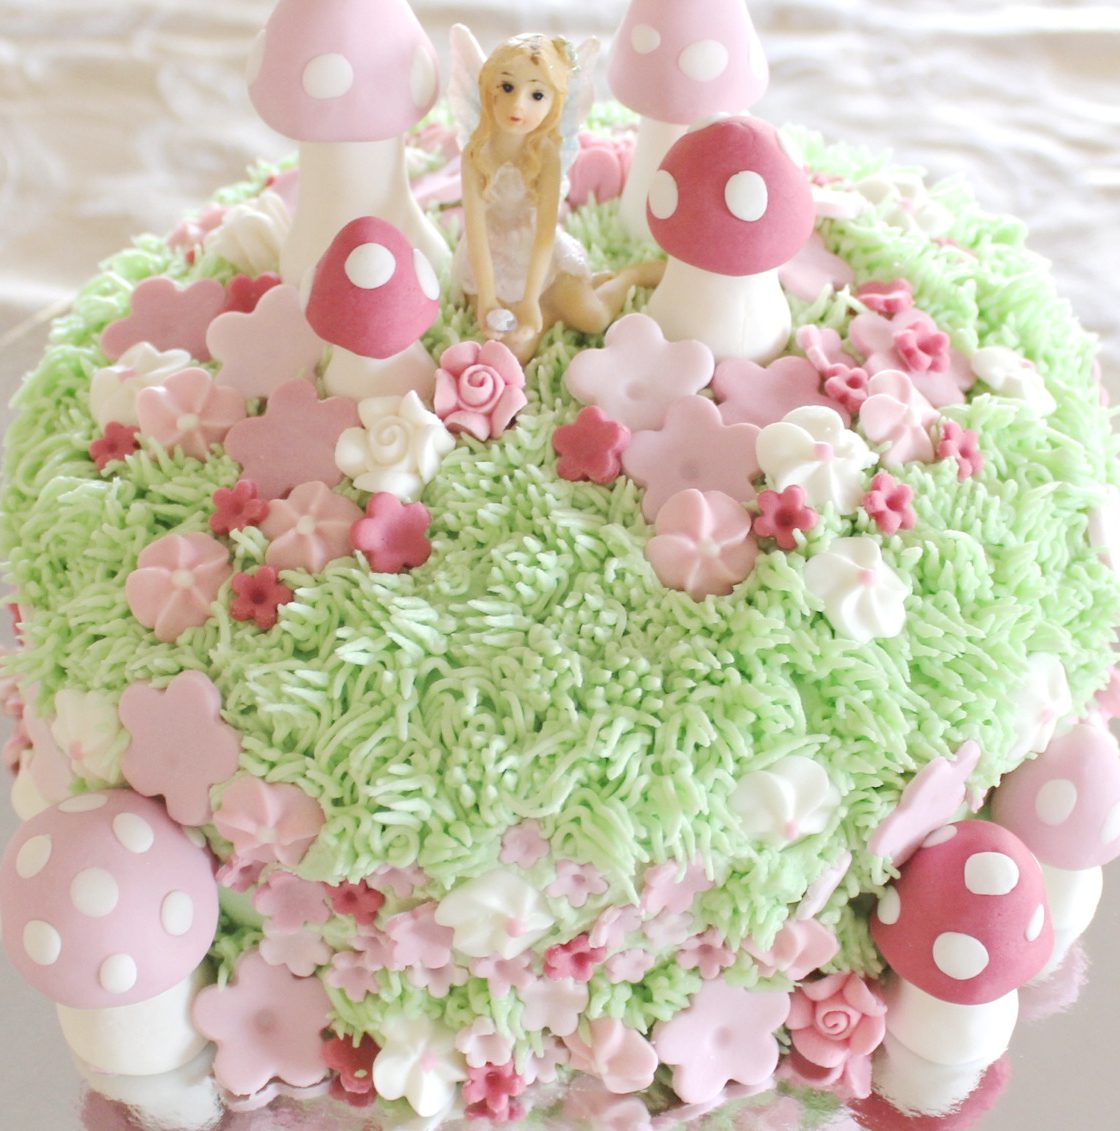 Fairy Cake Decorations How to make fairy cakes, you can use your